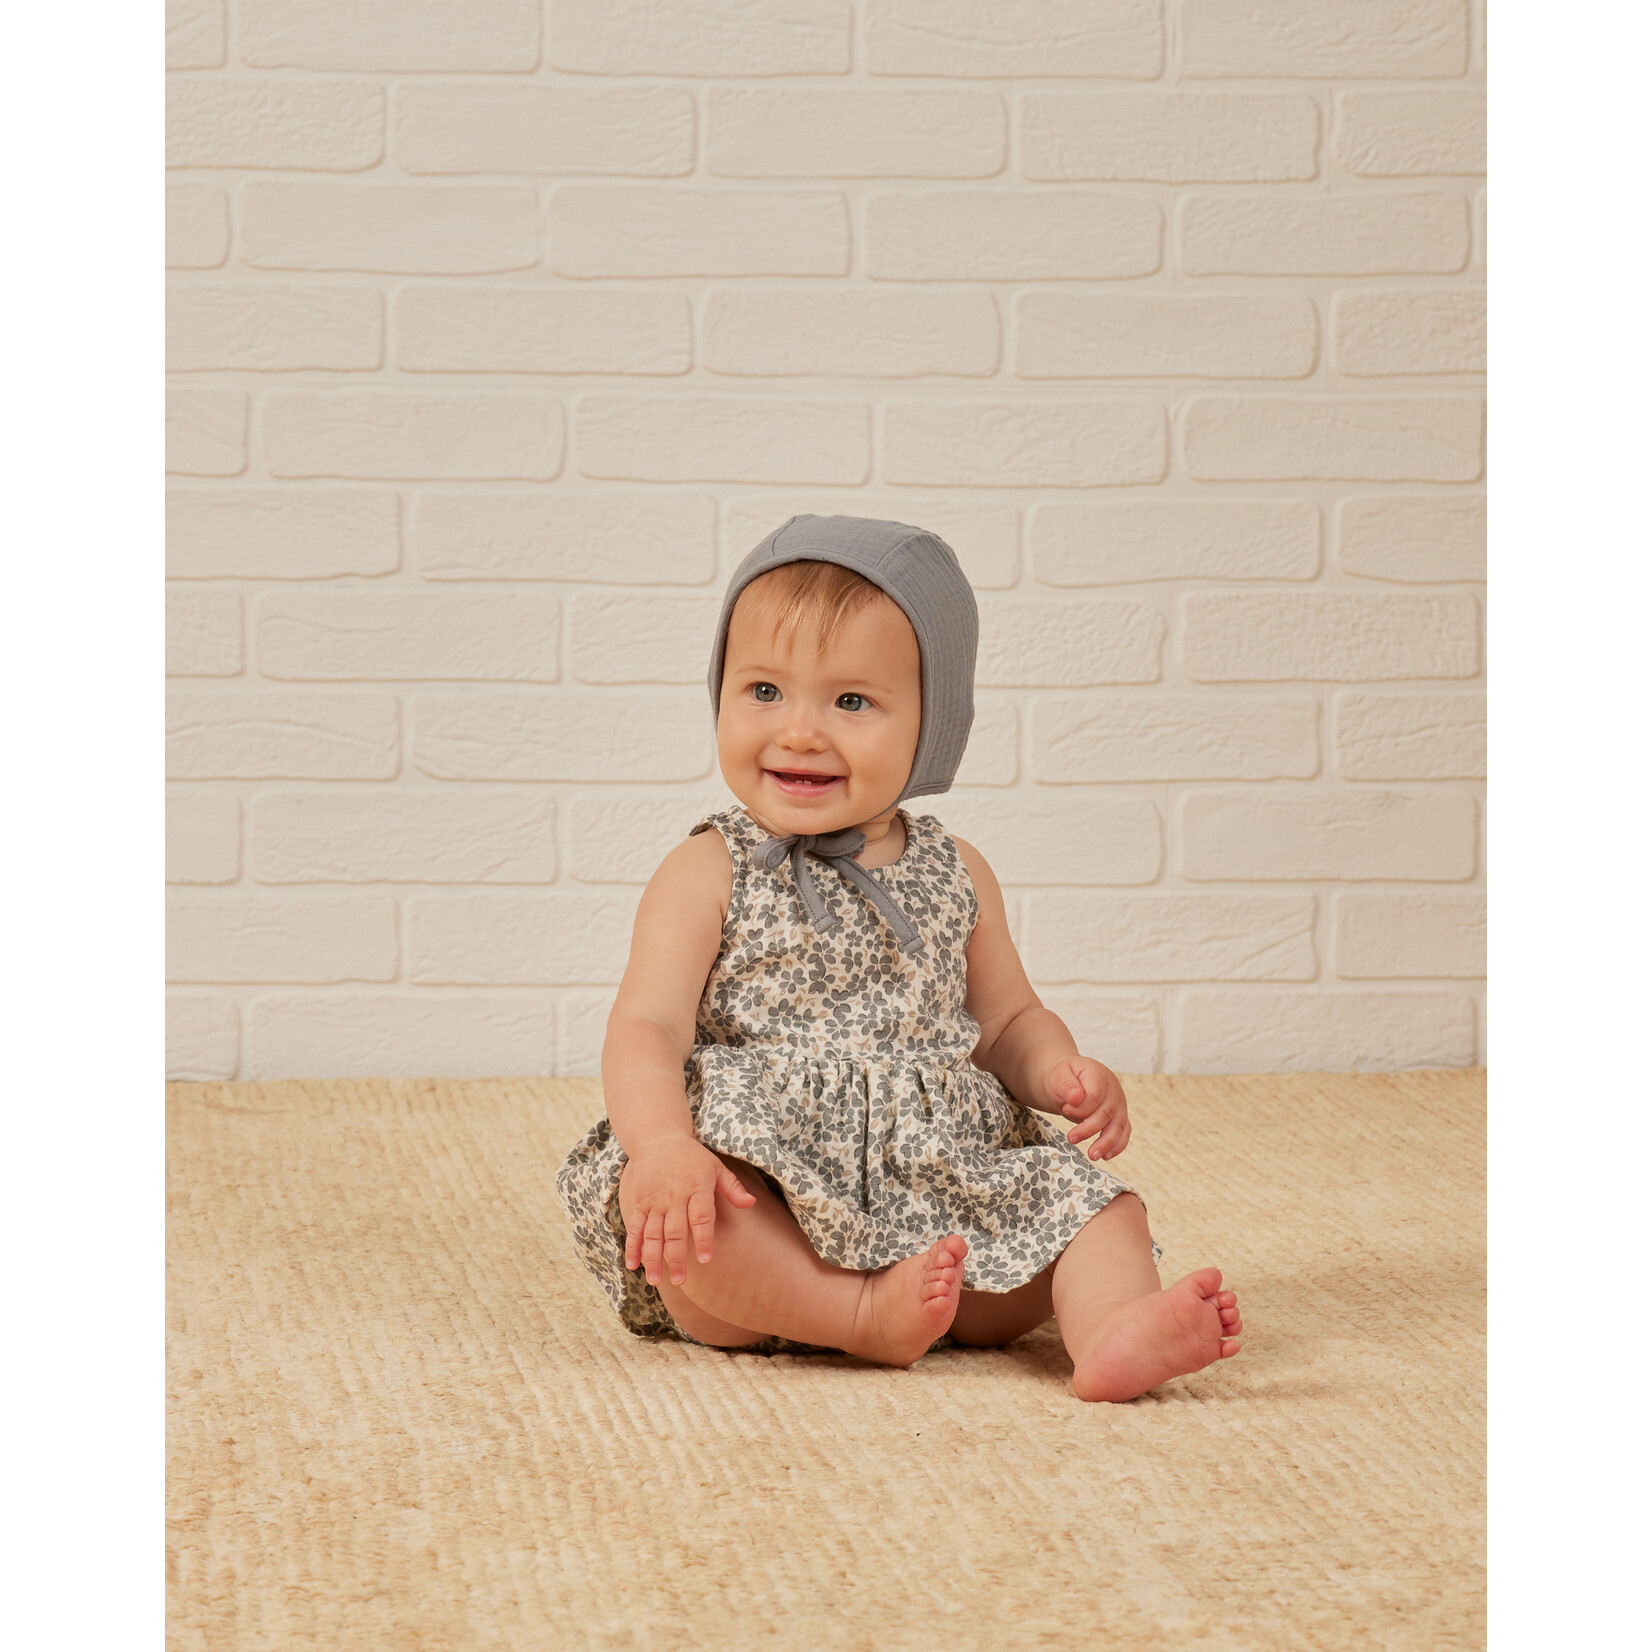 Quincy Mae Quincy Mae - Skirted Tank Romper